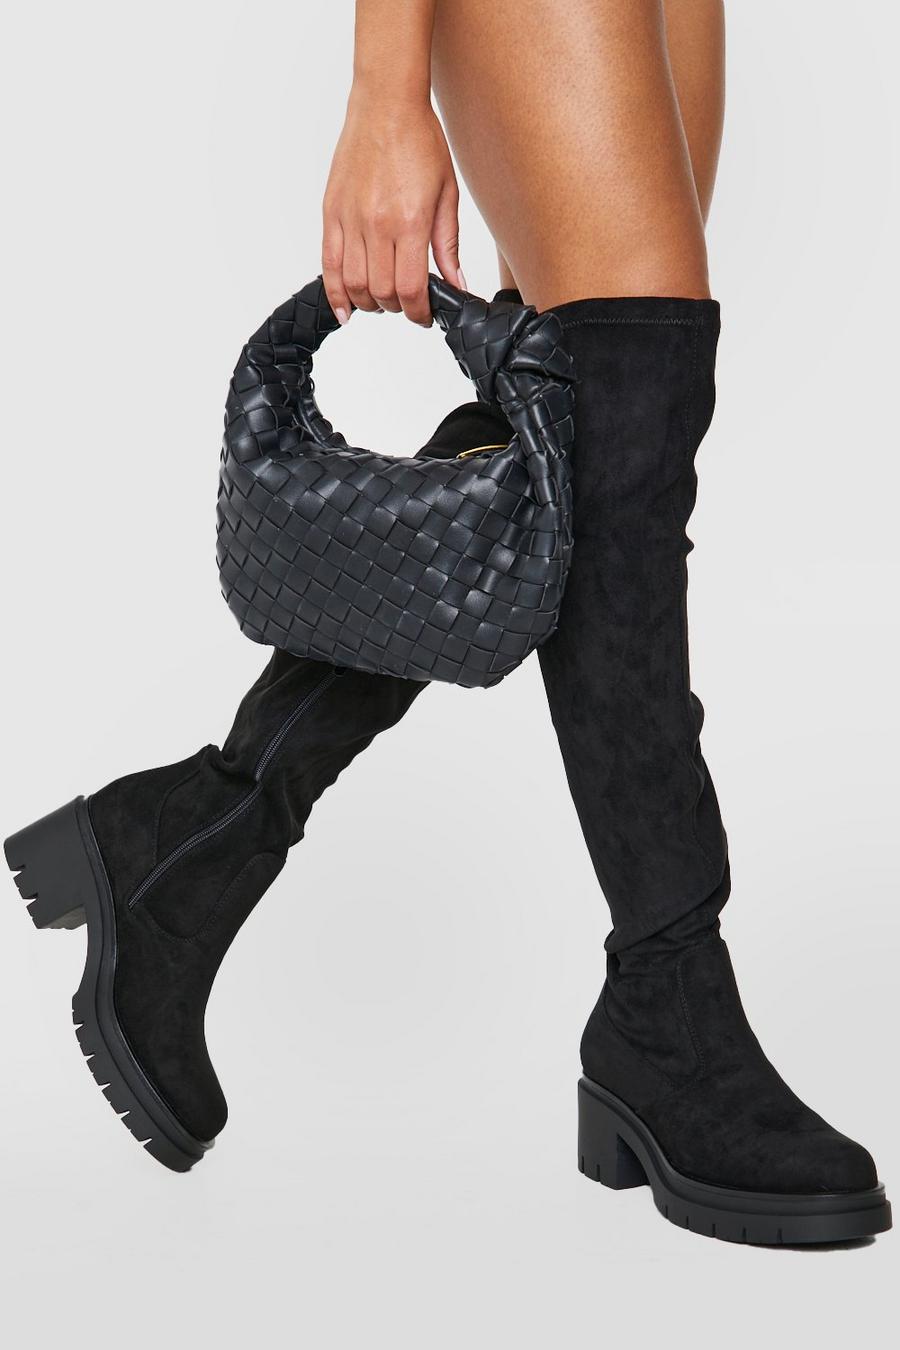 Black Wide Width Lug Over The Knee Boots